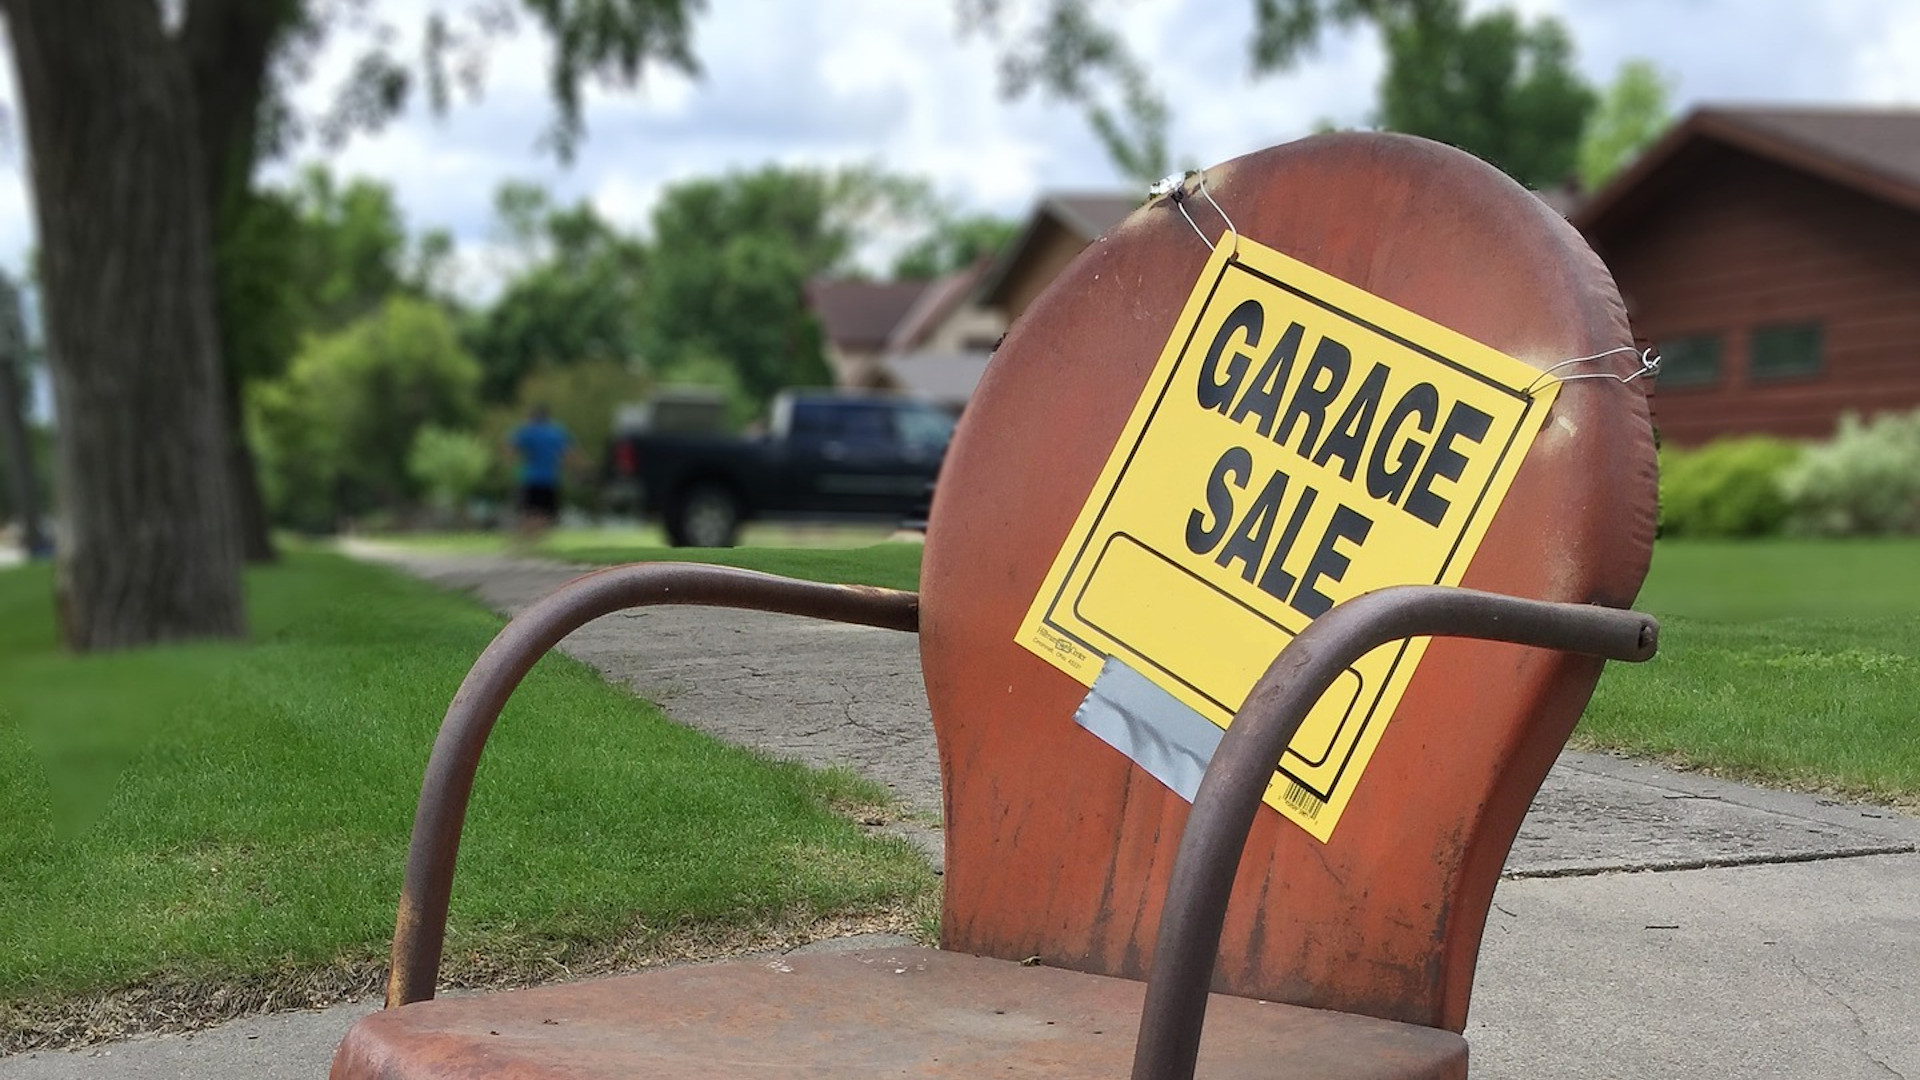 Garage Sale sign taped to an old office chair